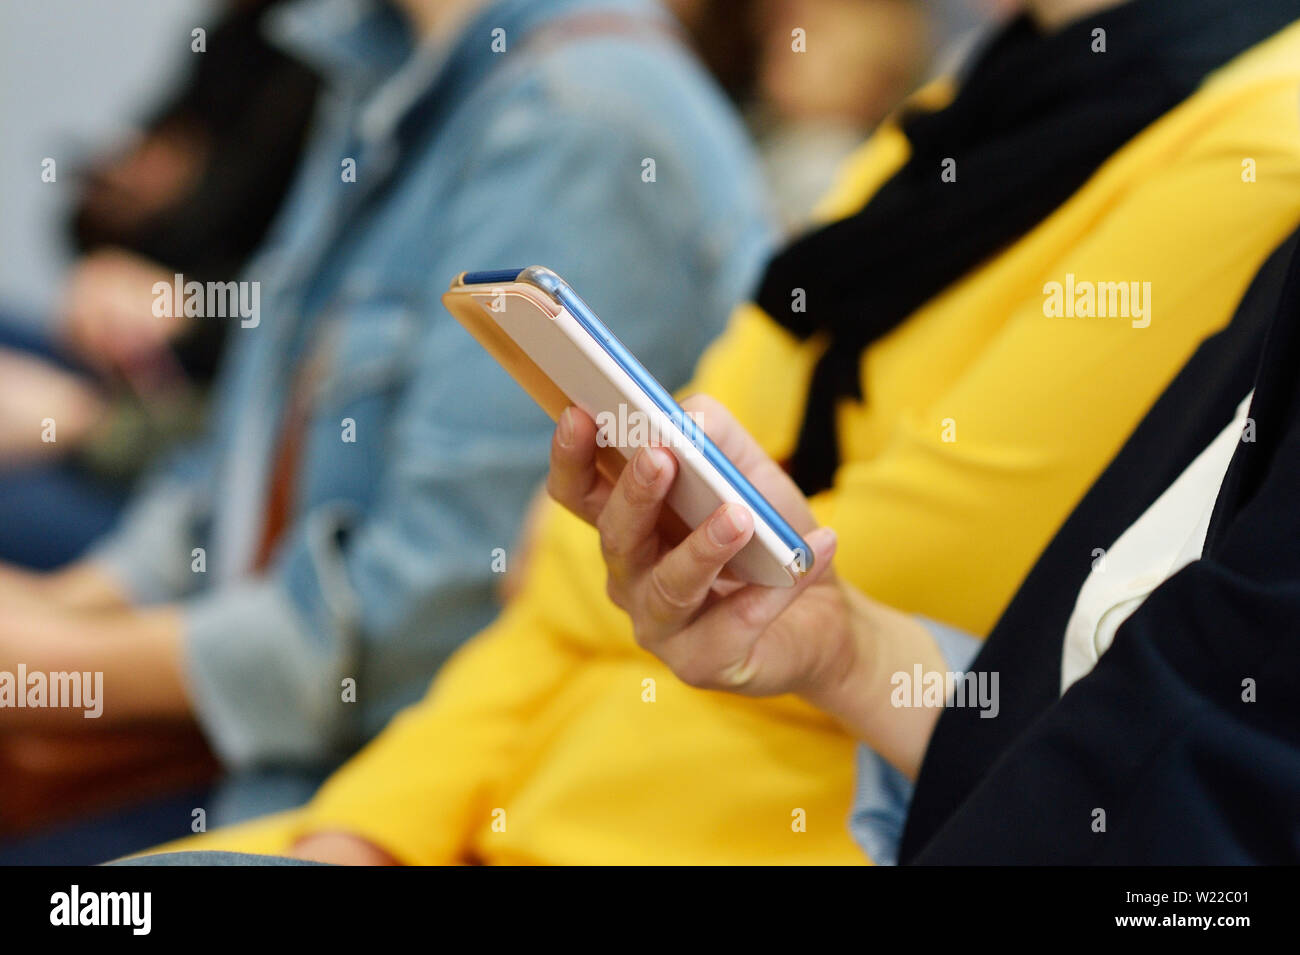 Concept of phone dependency. Woman holding device and touching screen or writes a message Stock Photo